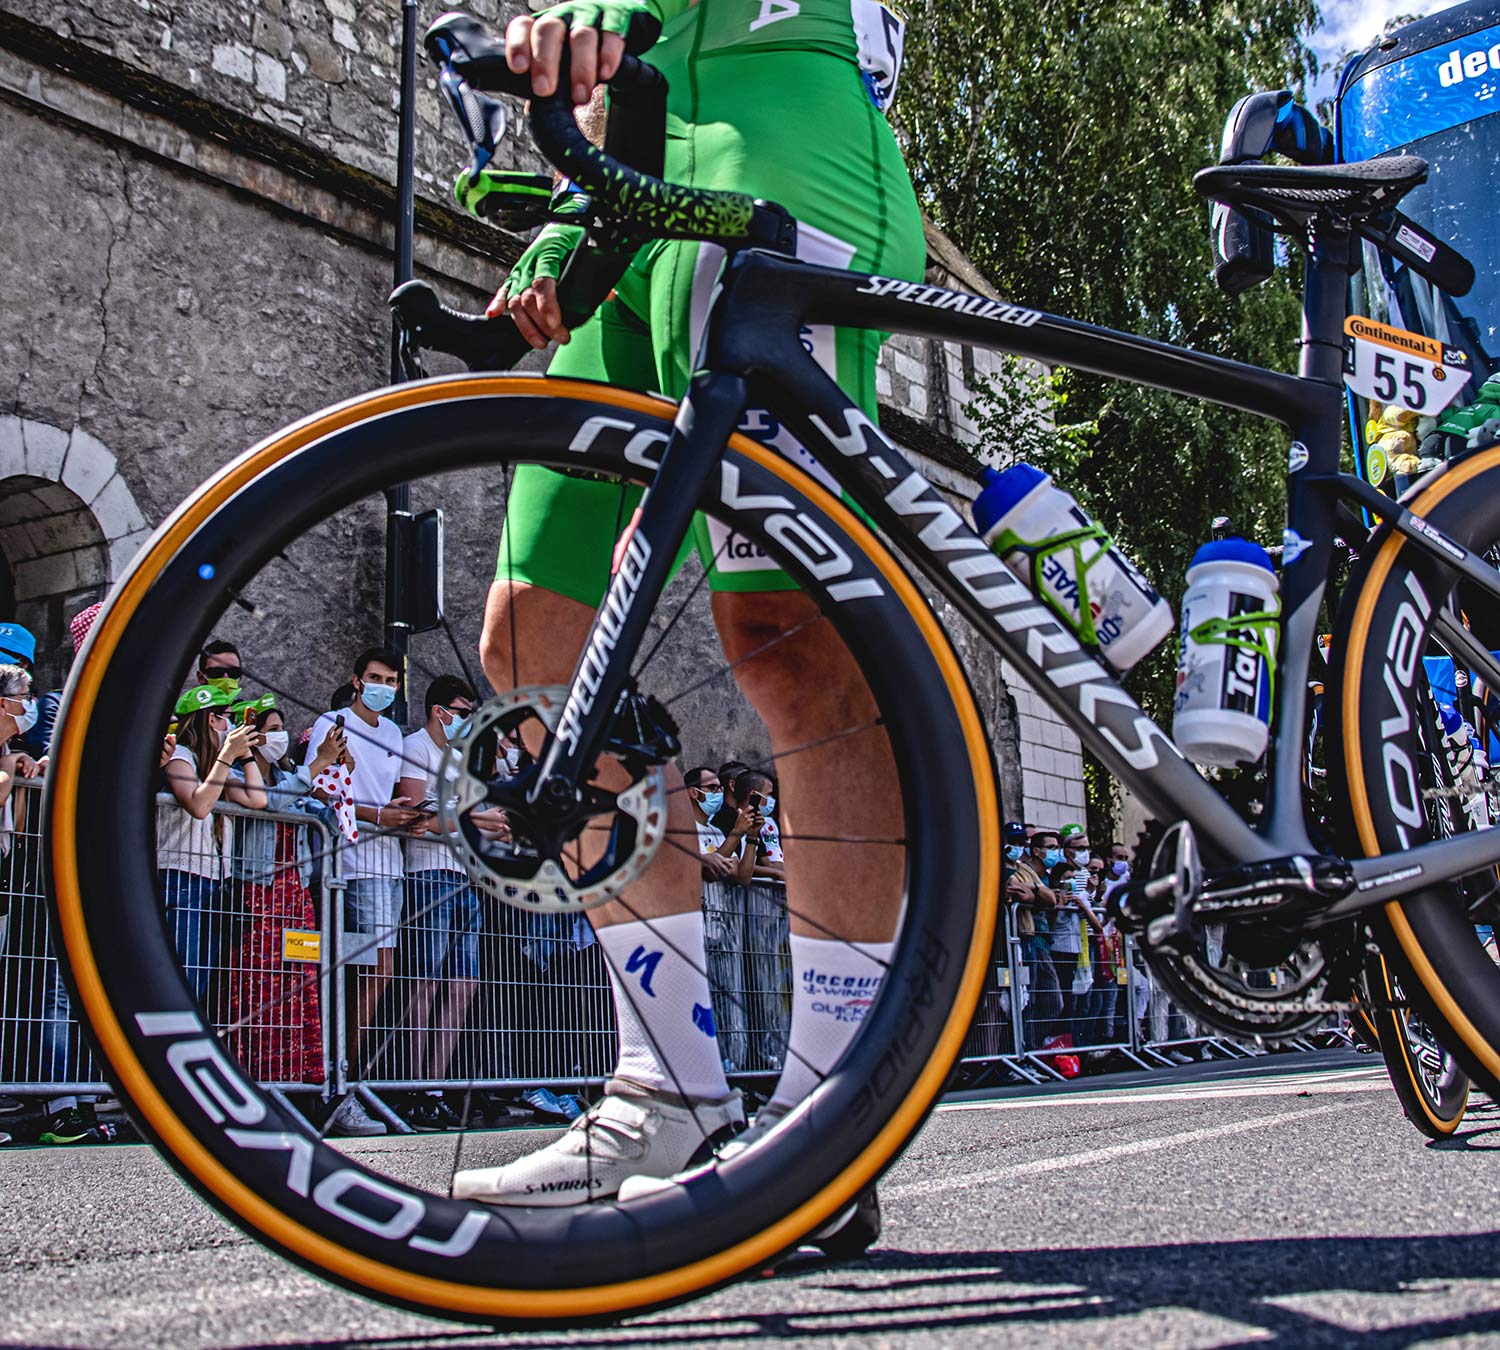 2021 Mark Cavendish 3x Tour de France stage winning green sprinter jersey Specialized S-Works Tarmac SL7, photo by Wout Beel, pre-race